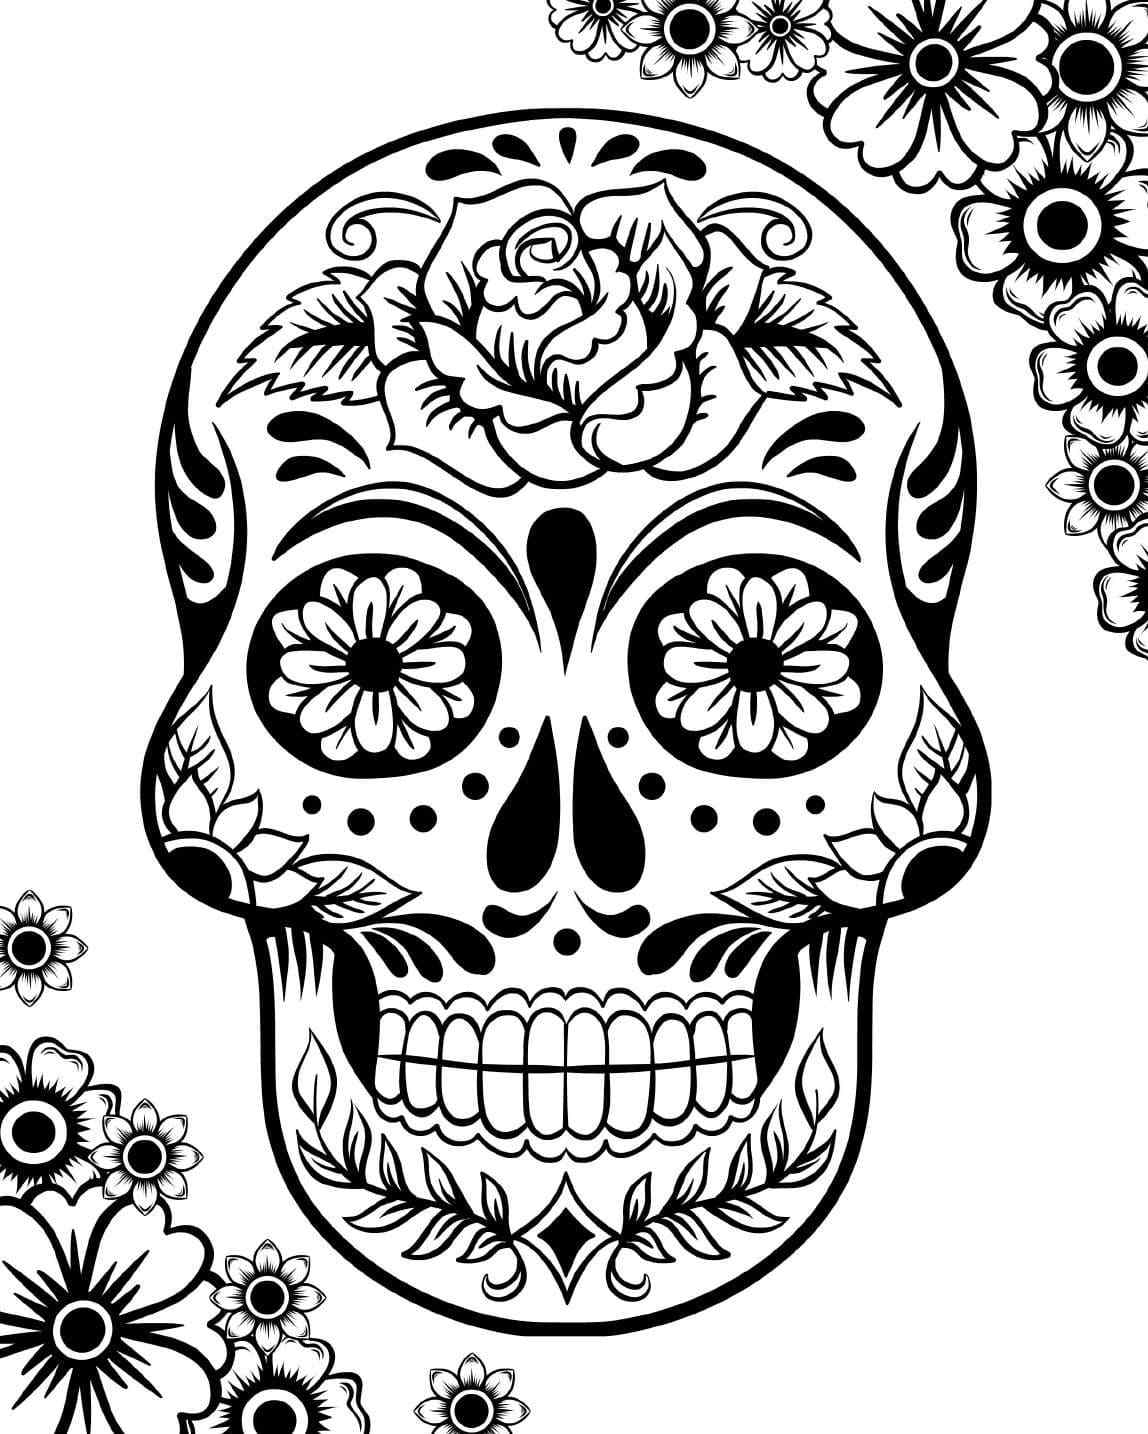 Floral Ornament On The Skull